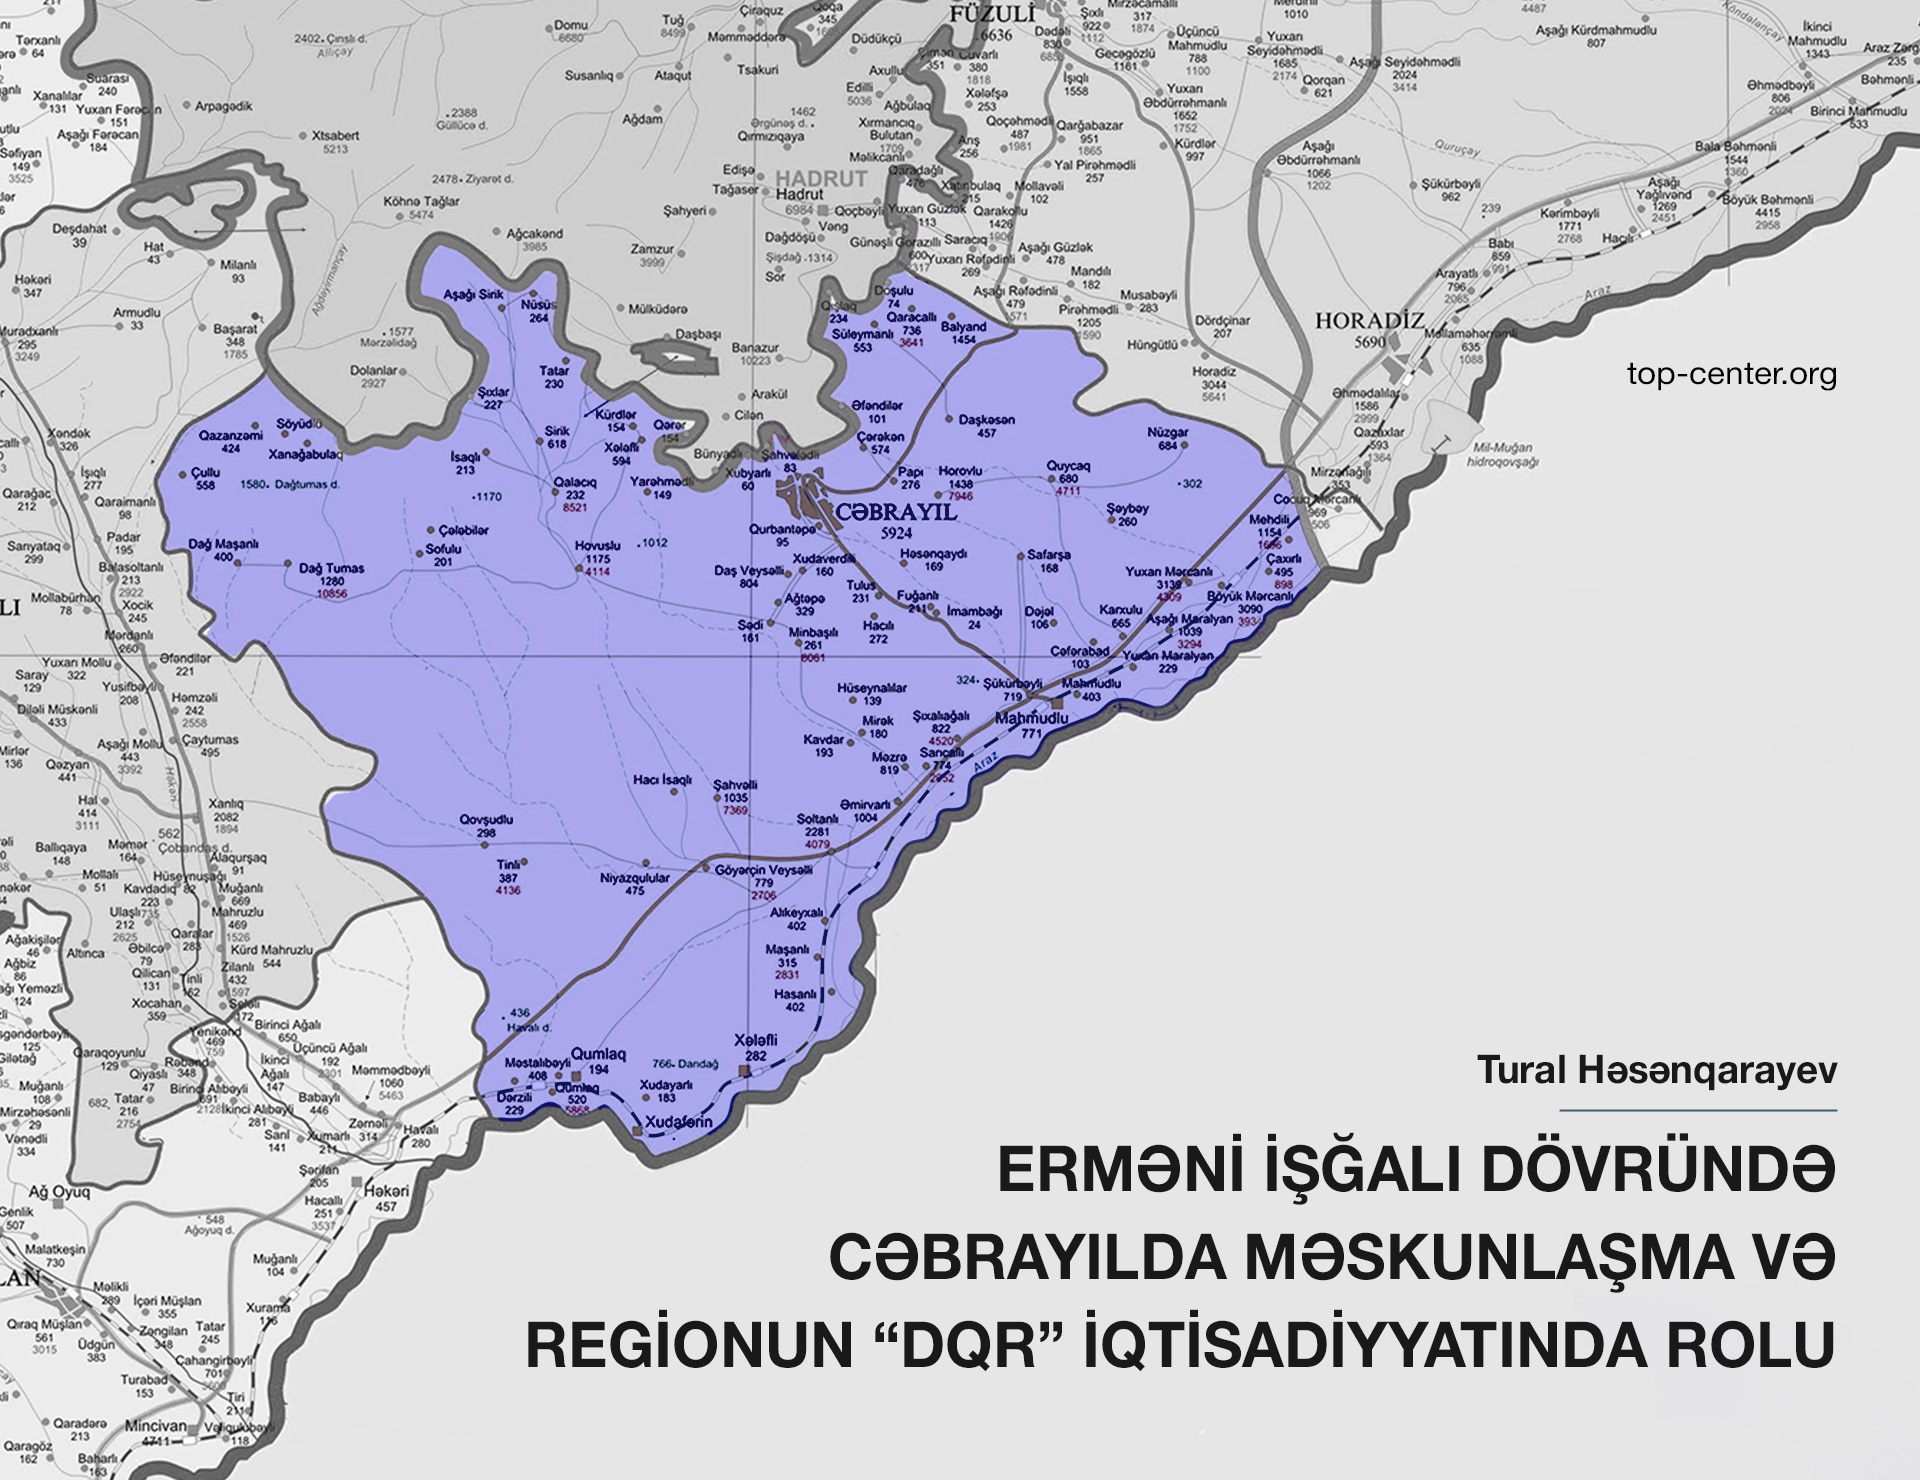 Settlement in Jabrayil during the Armenian occupation and the role of the province in the “NKR” economy